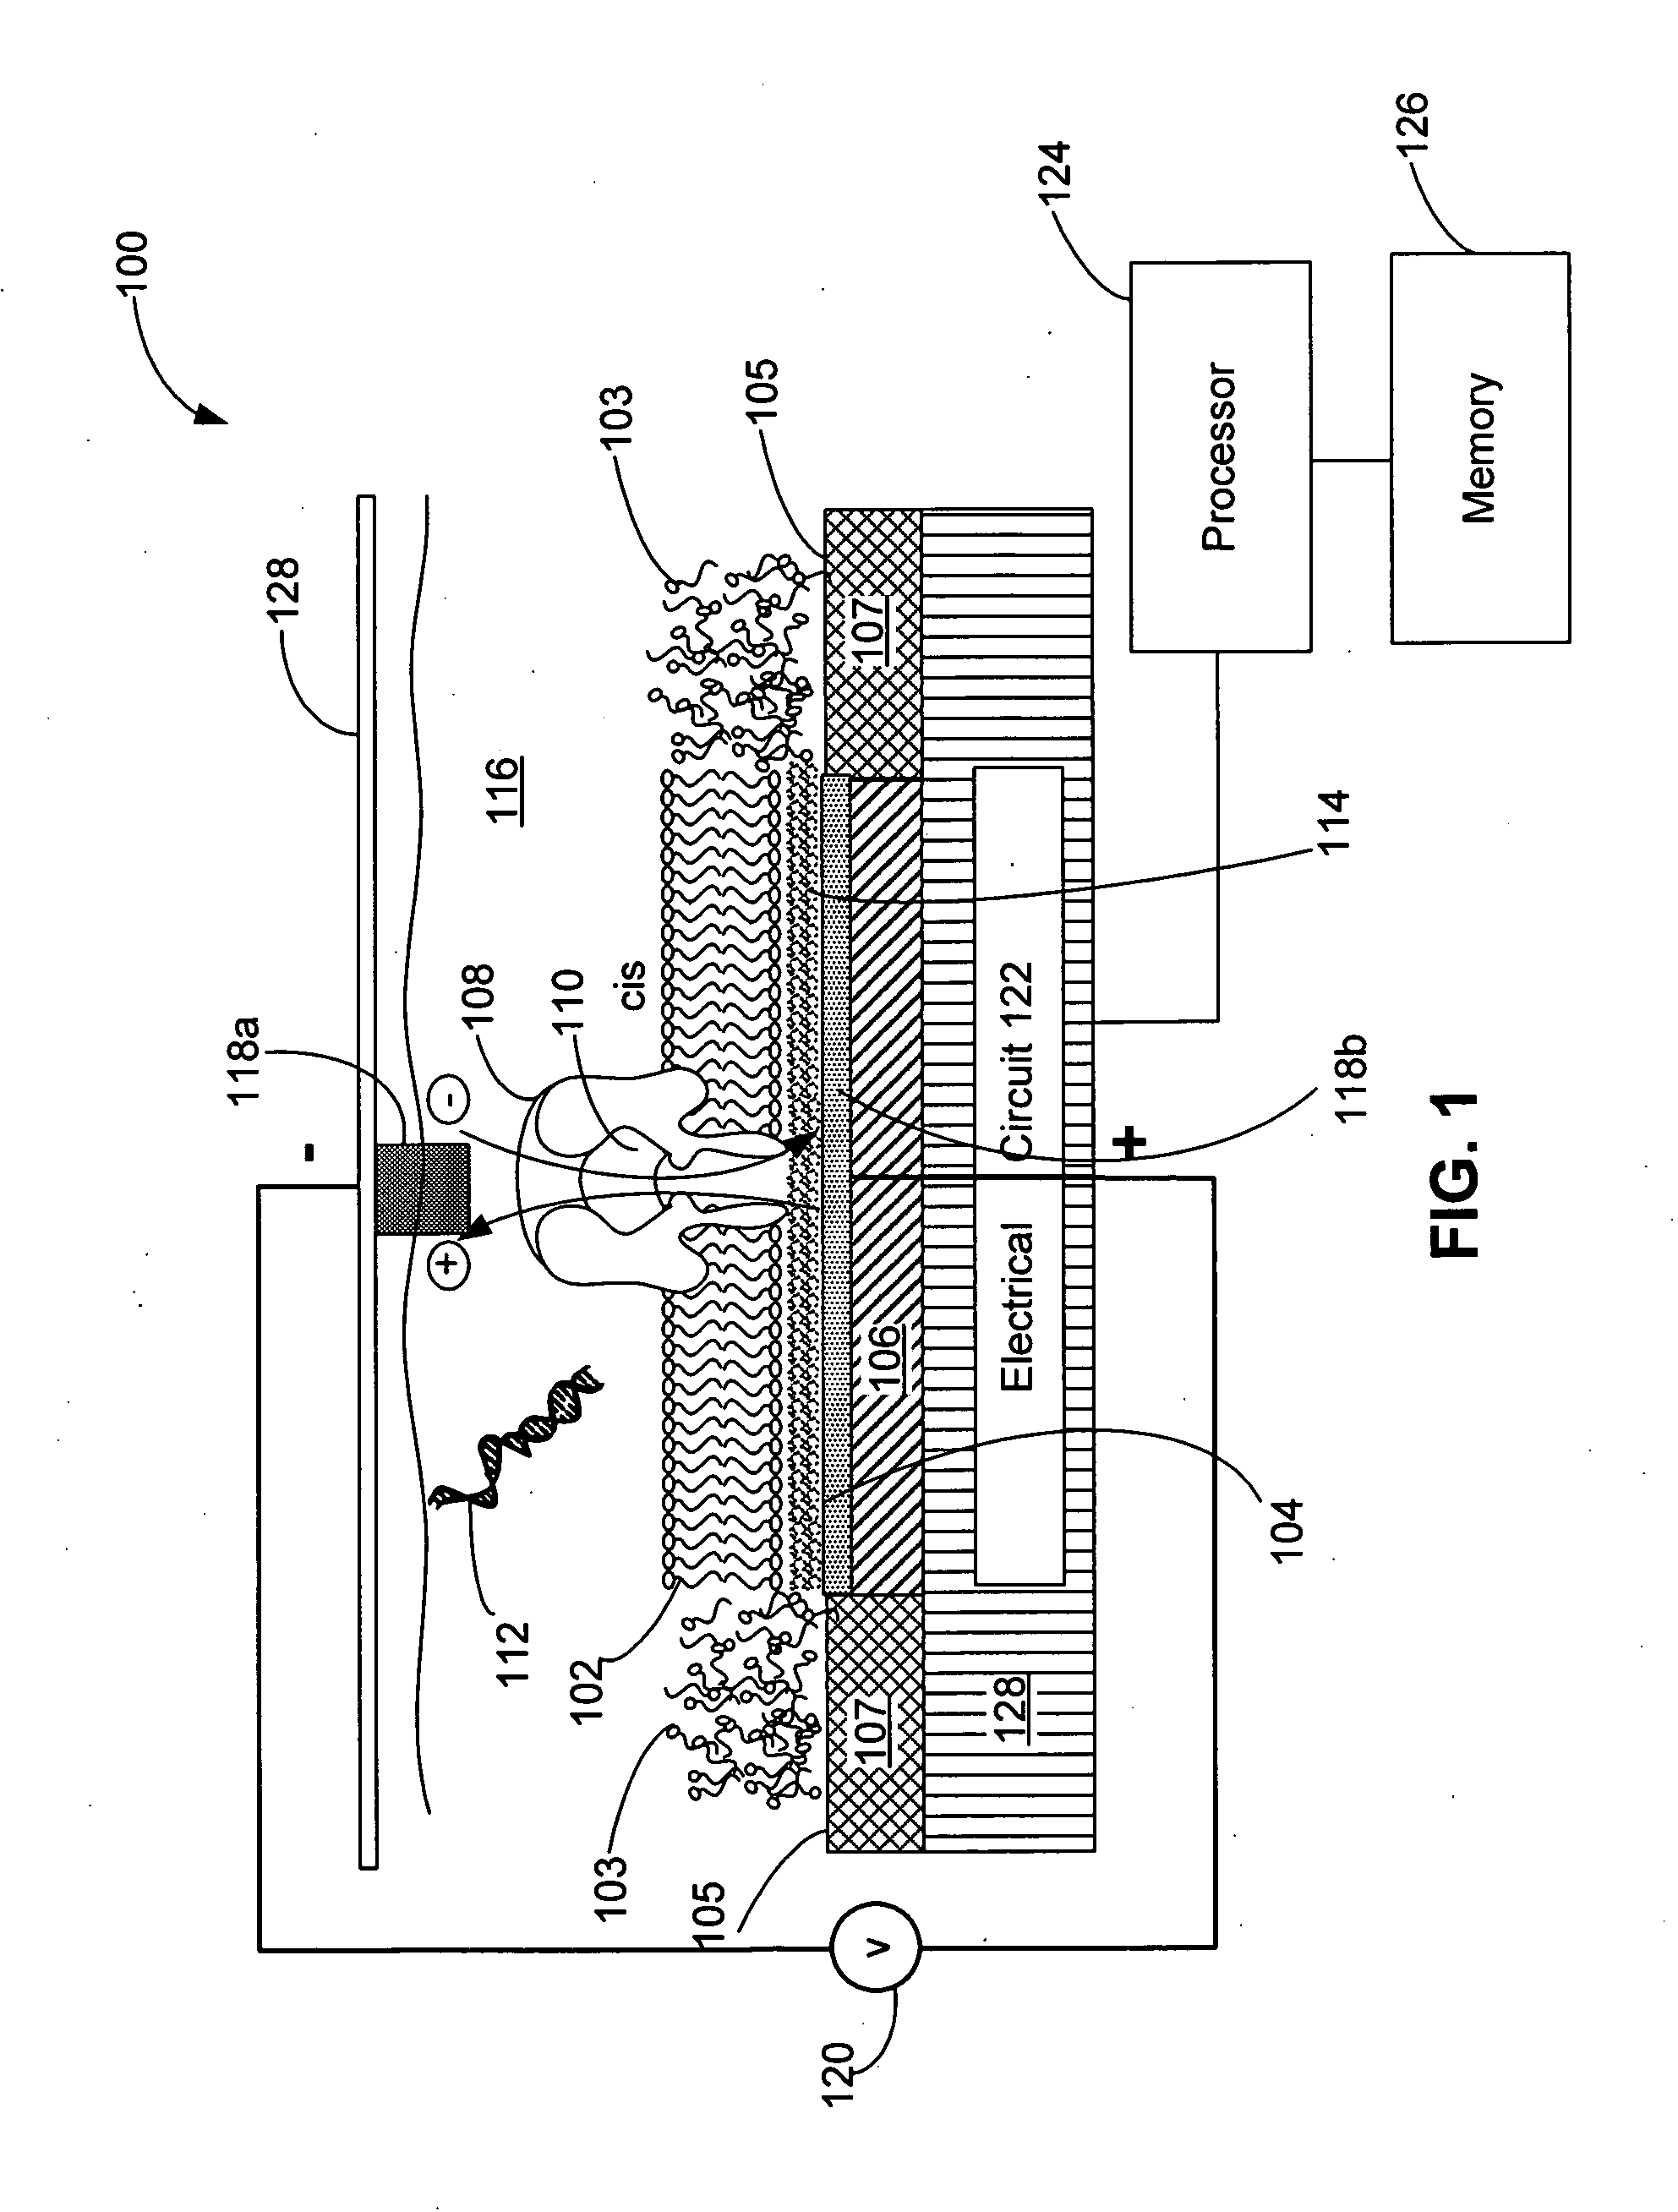 Systems and methods for assembling a lipid bilayer on a substantially planar solid surface